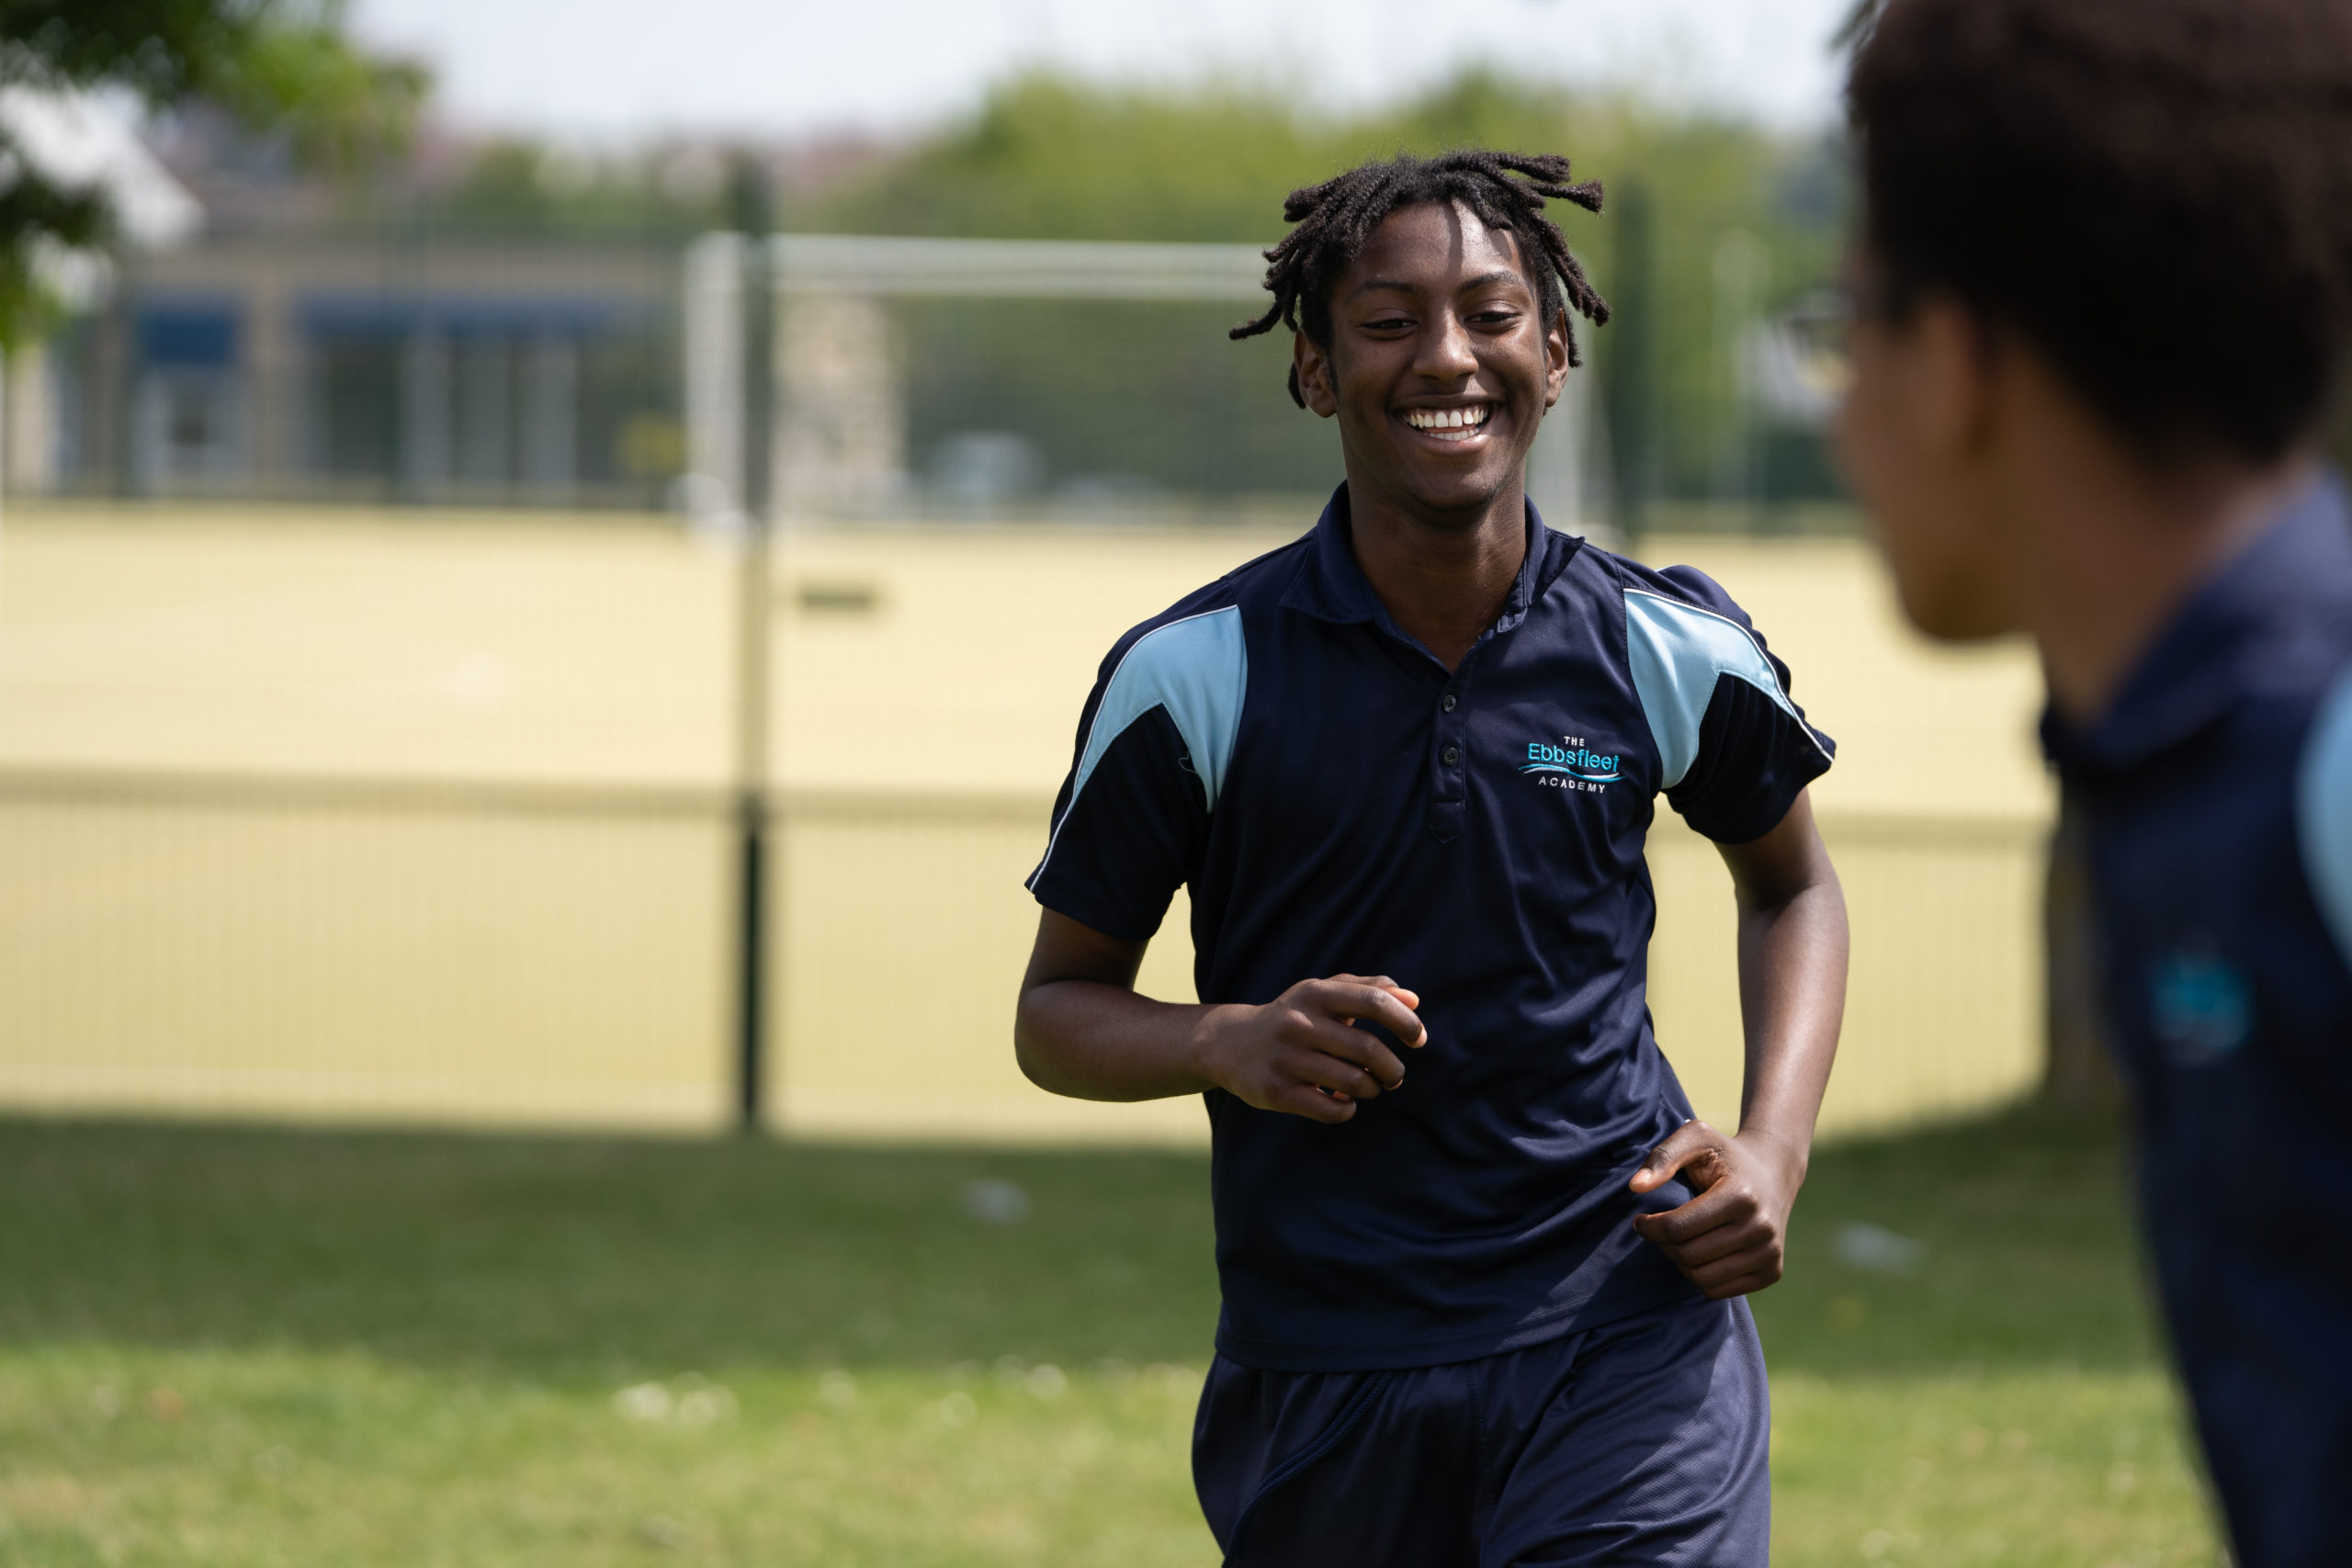 A male student is seen running on the school grounds, wearing his PE Kit and a smile on his face.